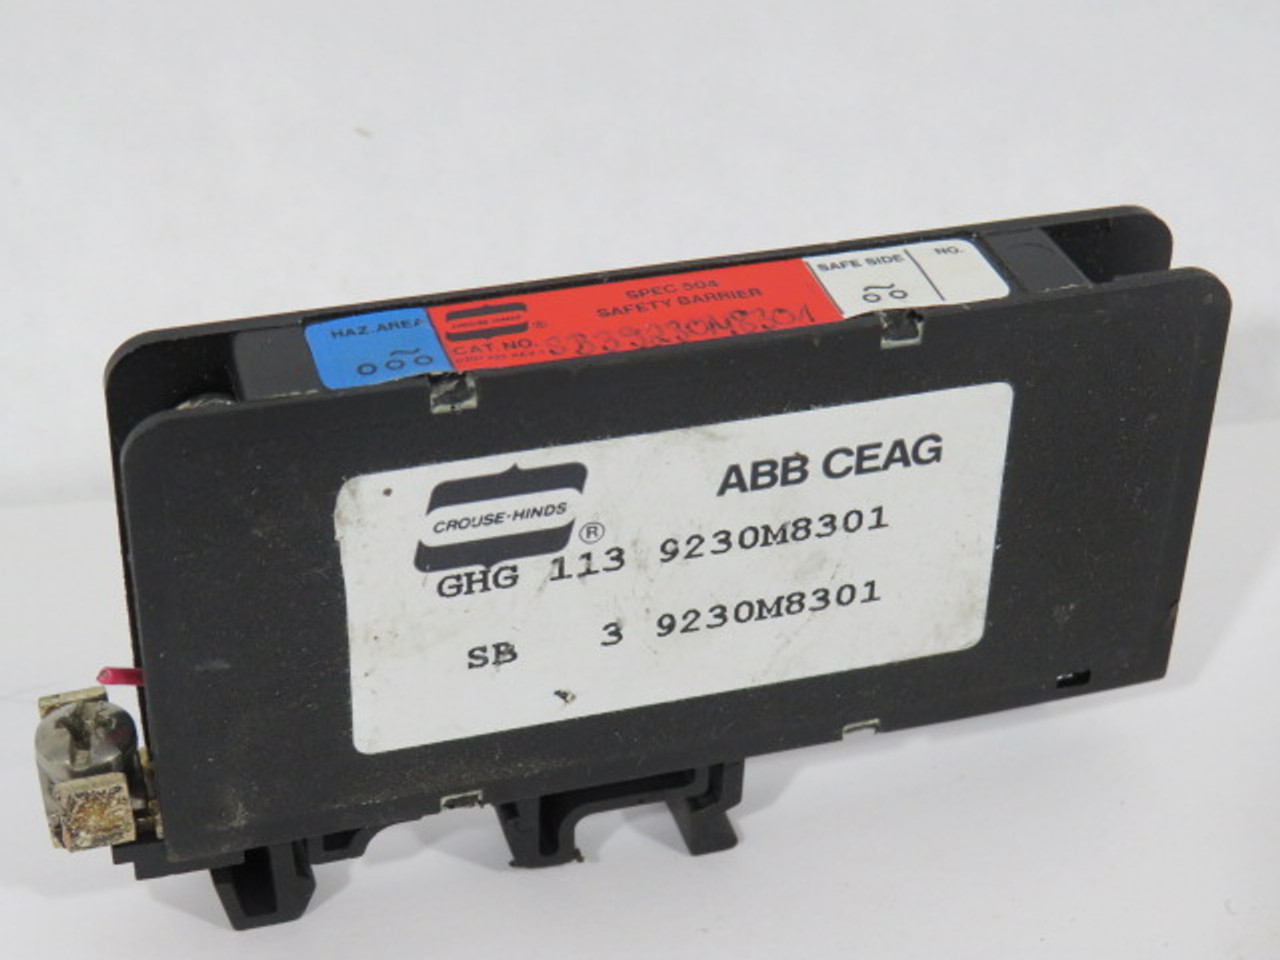 Crouse-Hinds SB39230M8301 Spec 504 ABB CEAG Intrinsic Safety Barrier USED